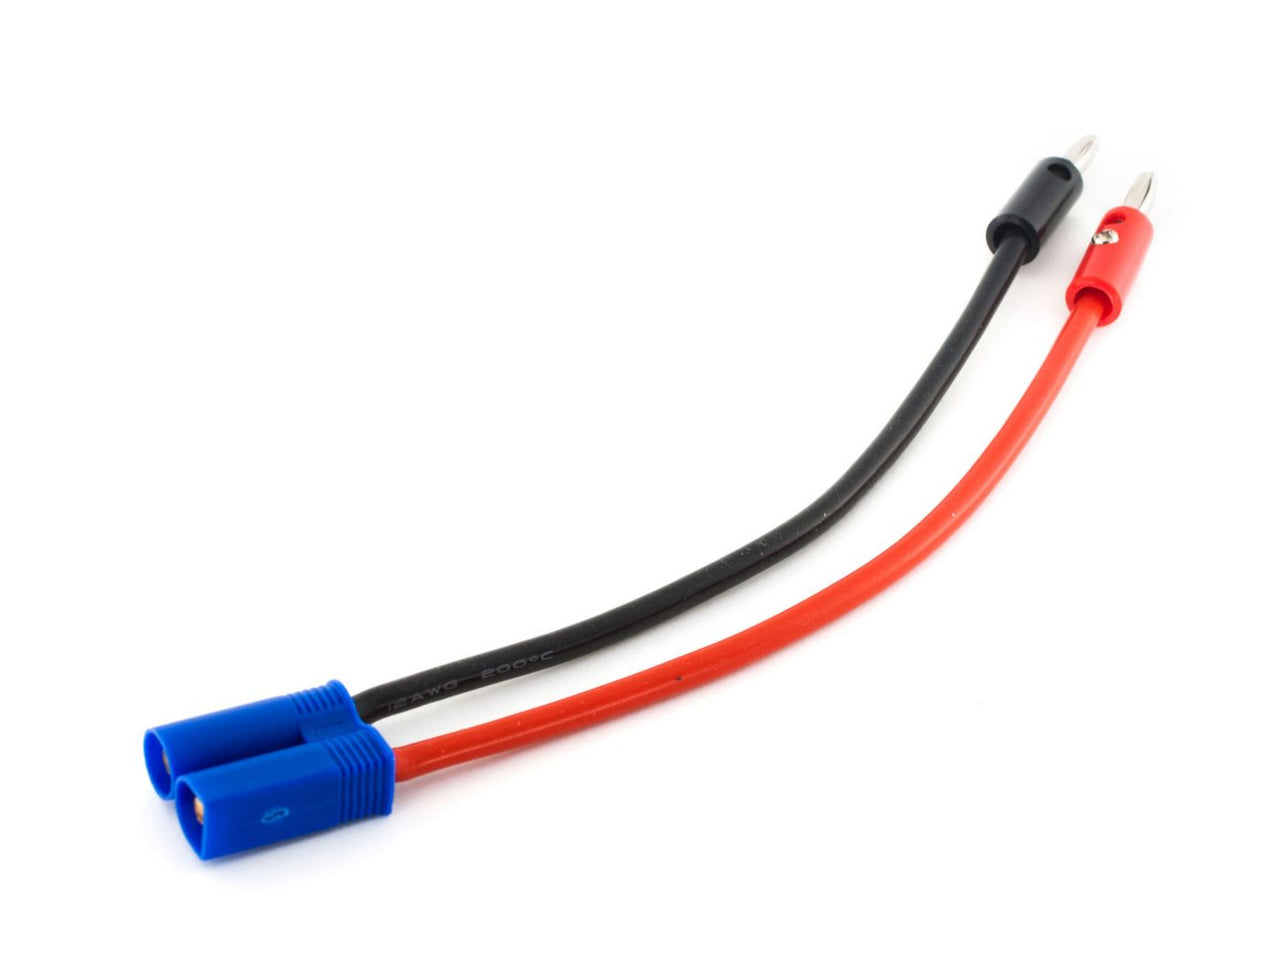 EFLAEC512 Charge Lead: EC5 Device with 6" Wire & Jacks, 12 AWG